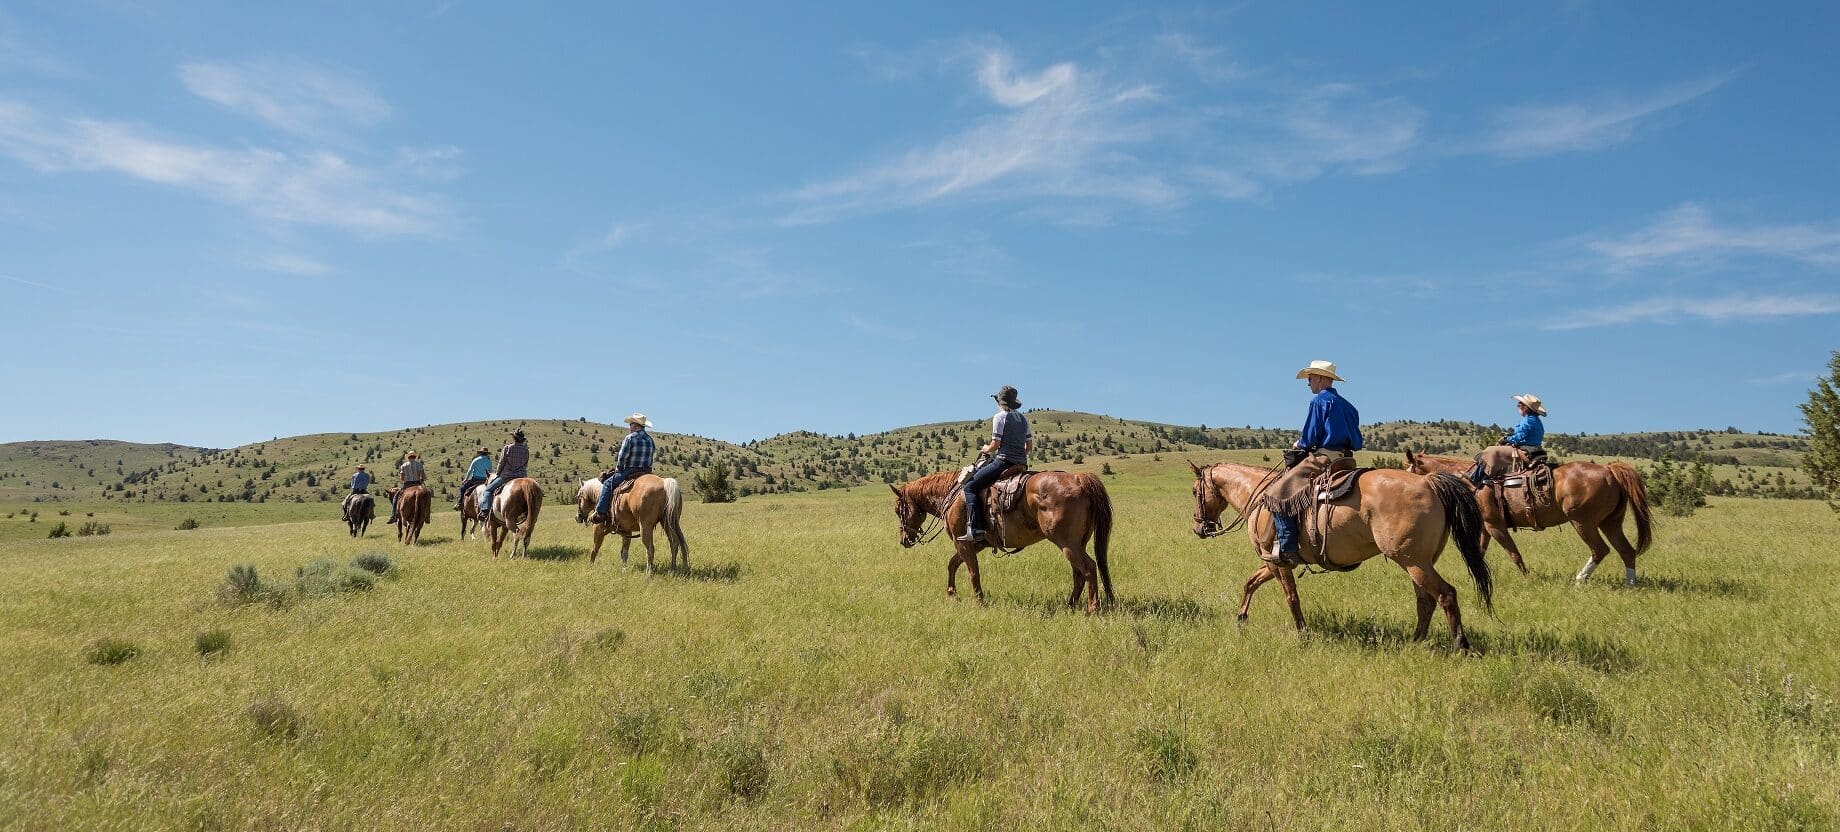 Horse back trail riders across the Wilson Ranches praries 